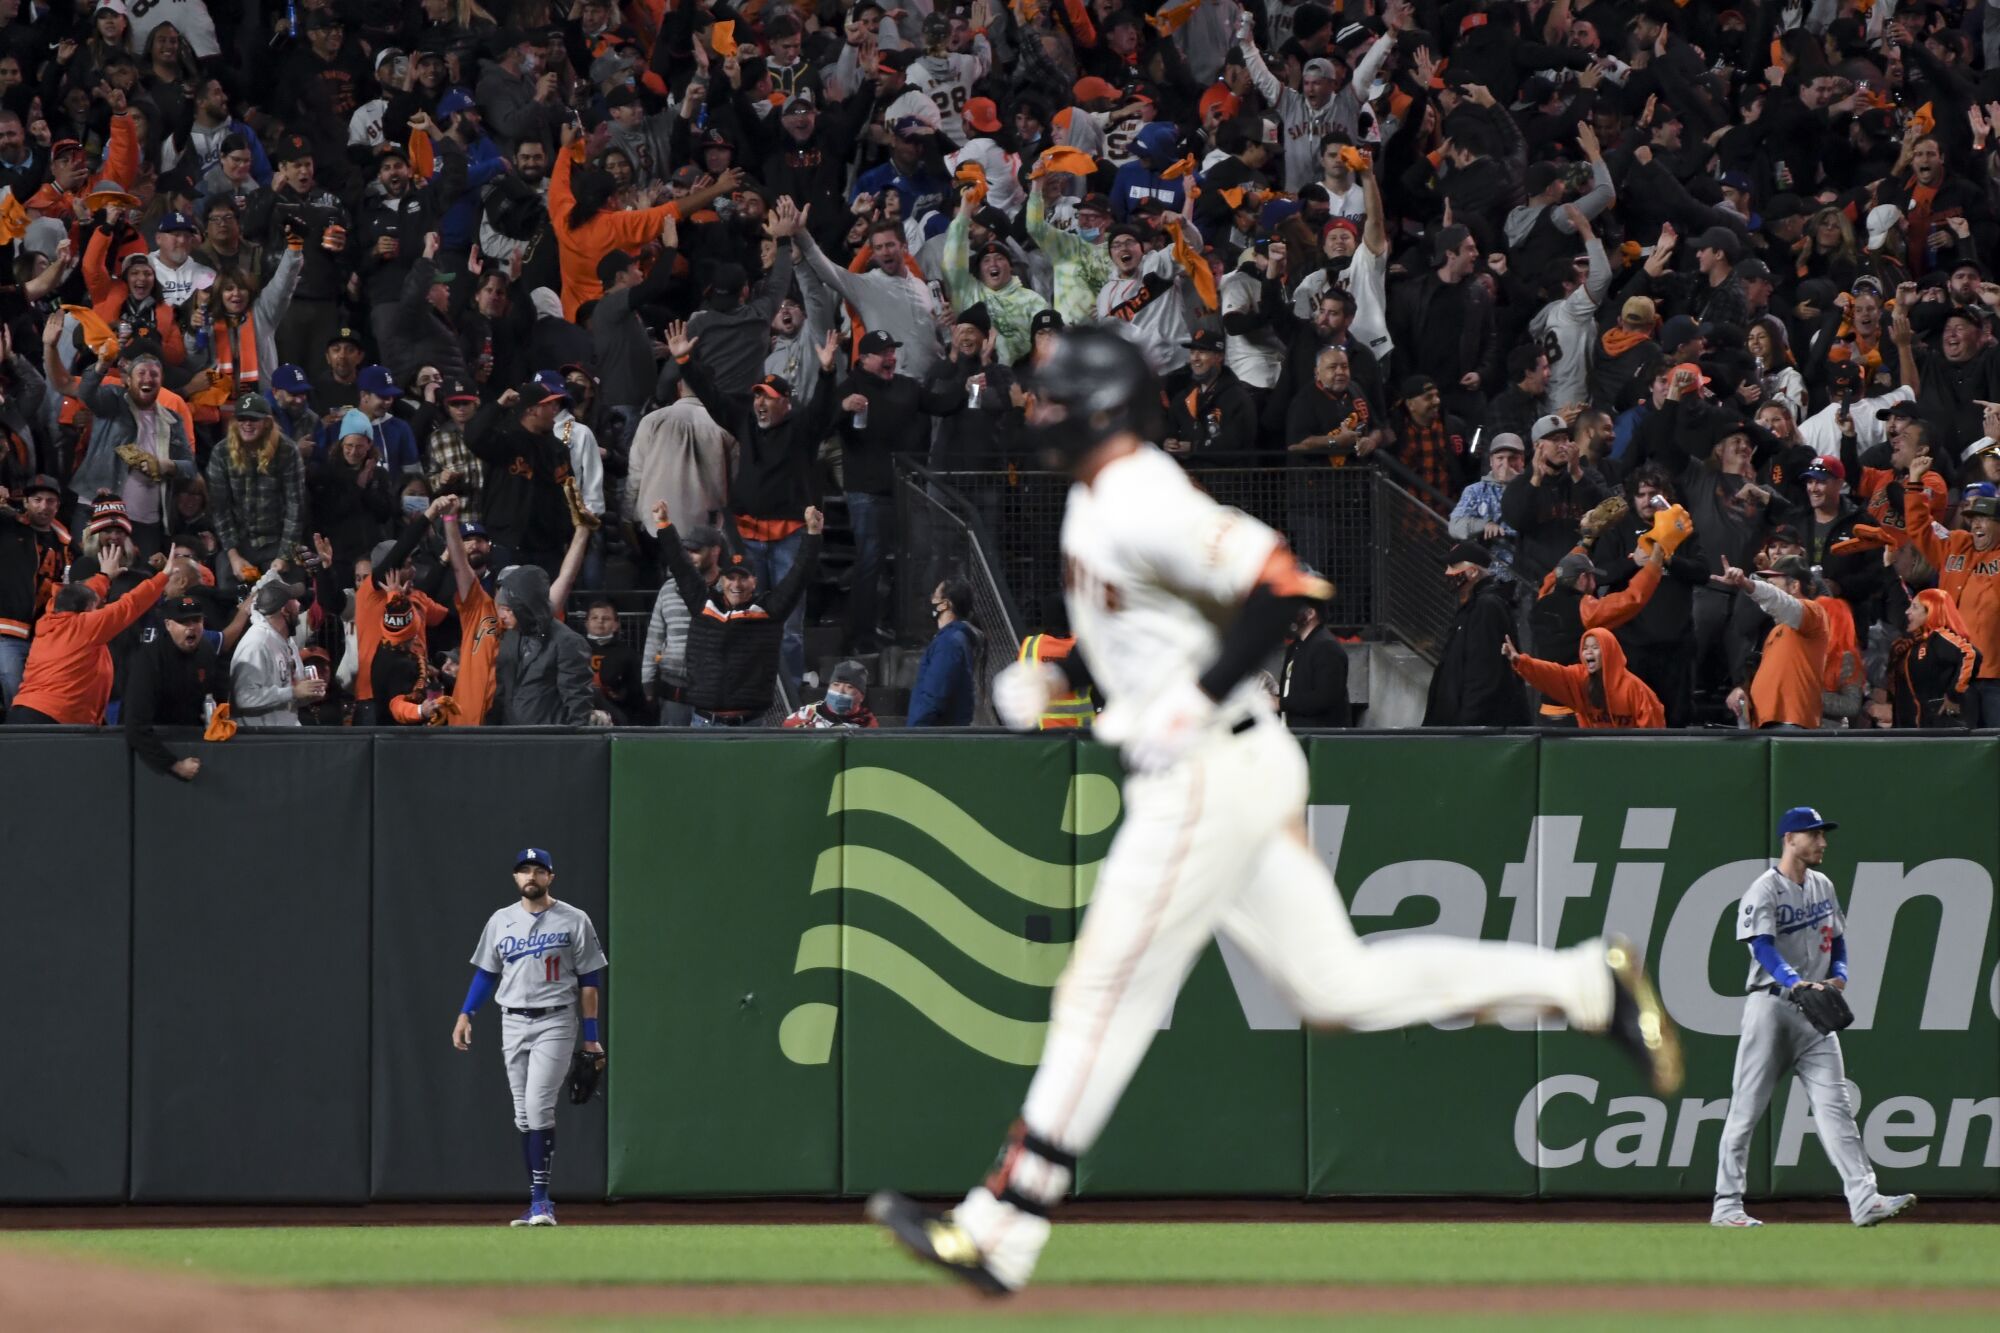 Fans cheer as San Francisco Giants' Kris Bryant rounds the bases off a solo home run